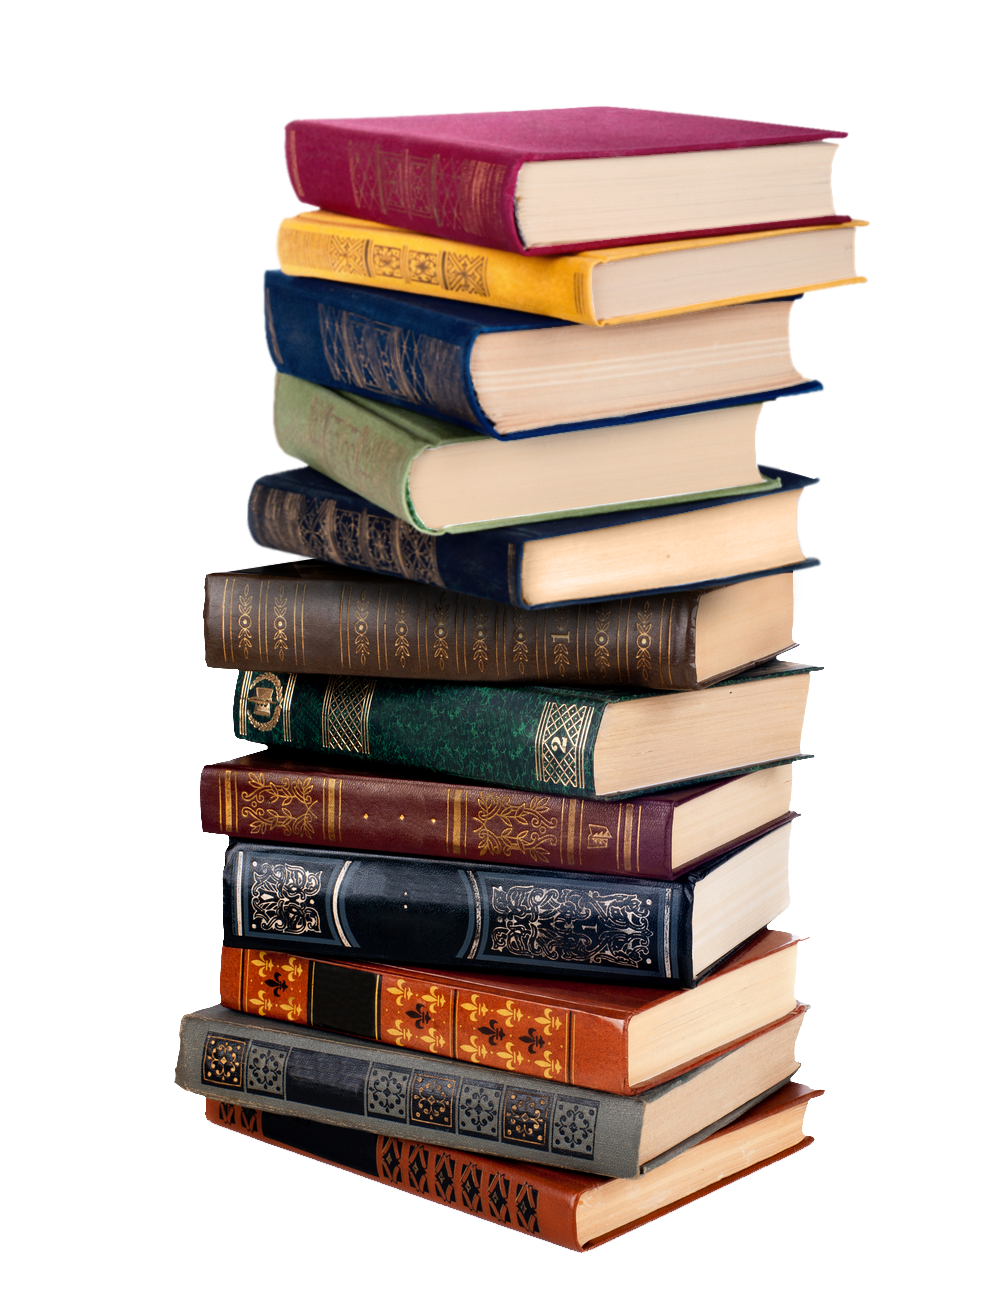 Book PNG HD - Book Png